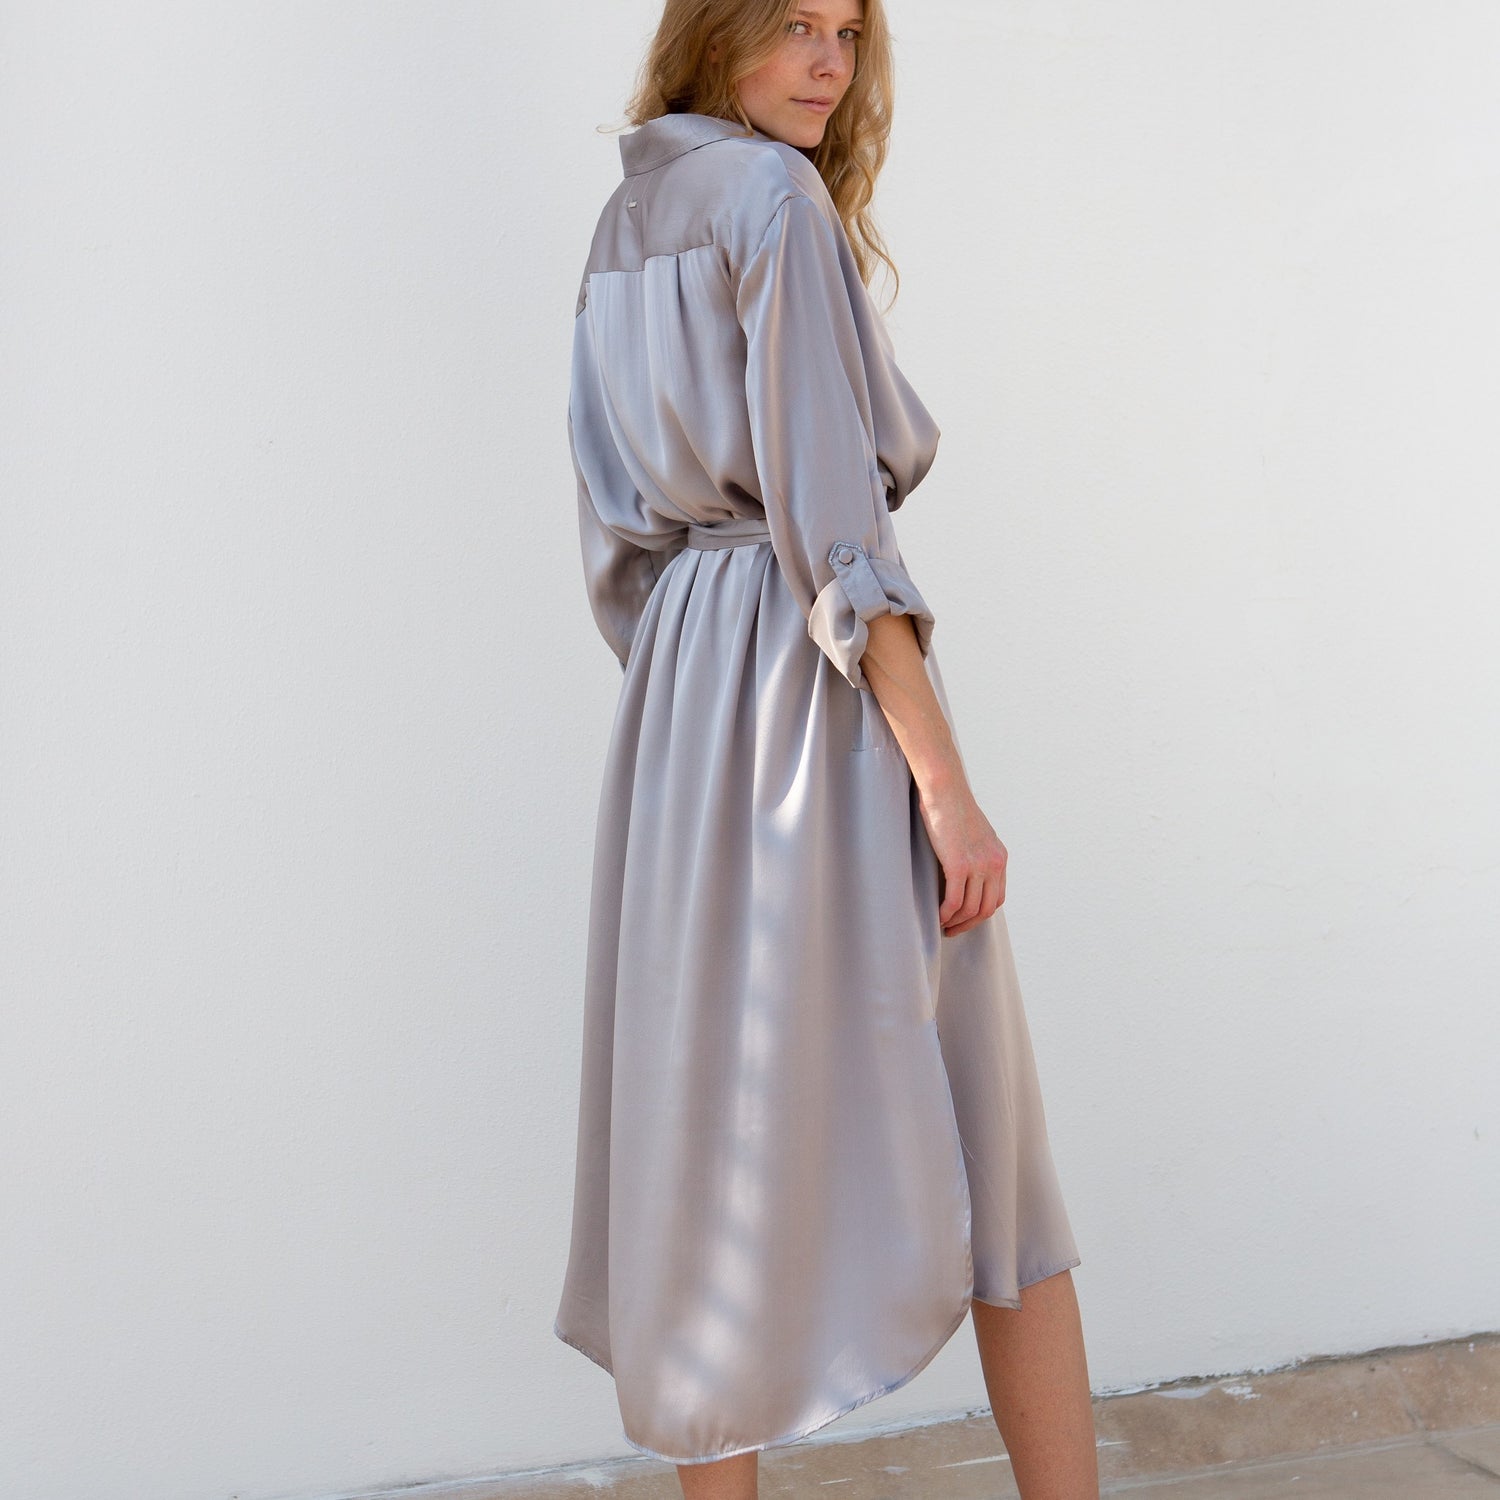 Elegant silk shirt dress in Silver with button-up front.